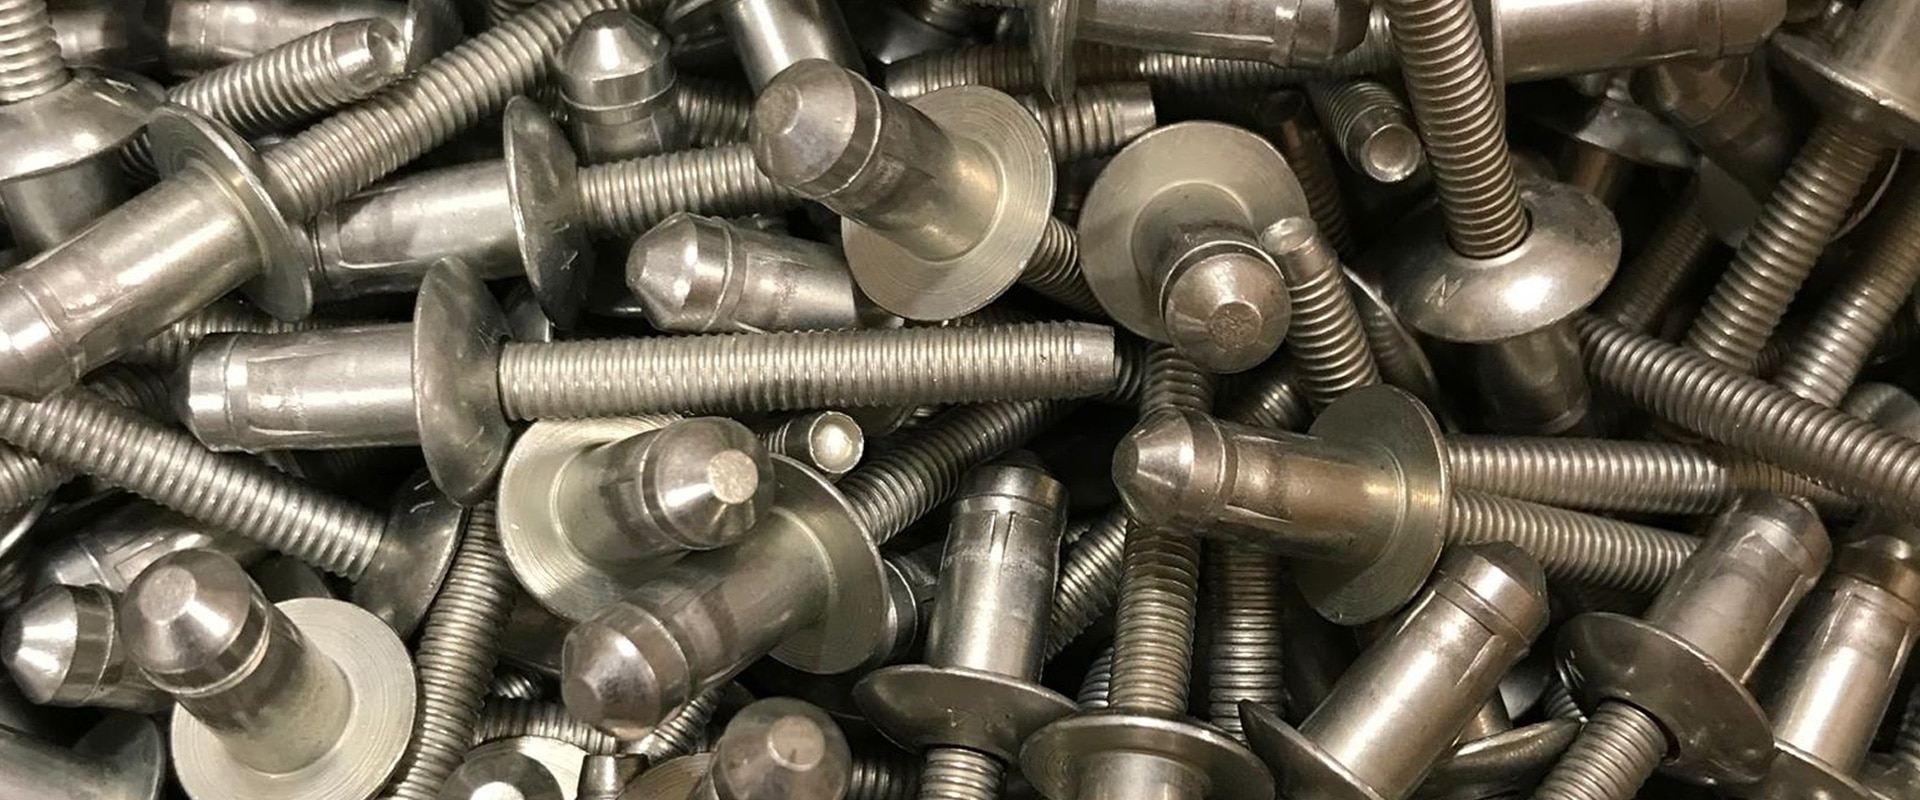 Avdel® - Blind Fasteners and Structural Rivets